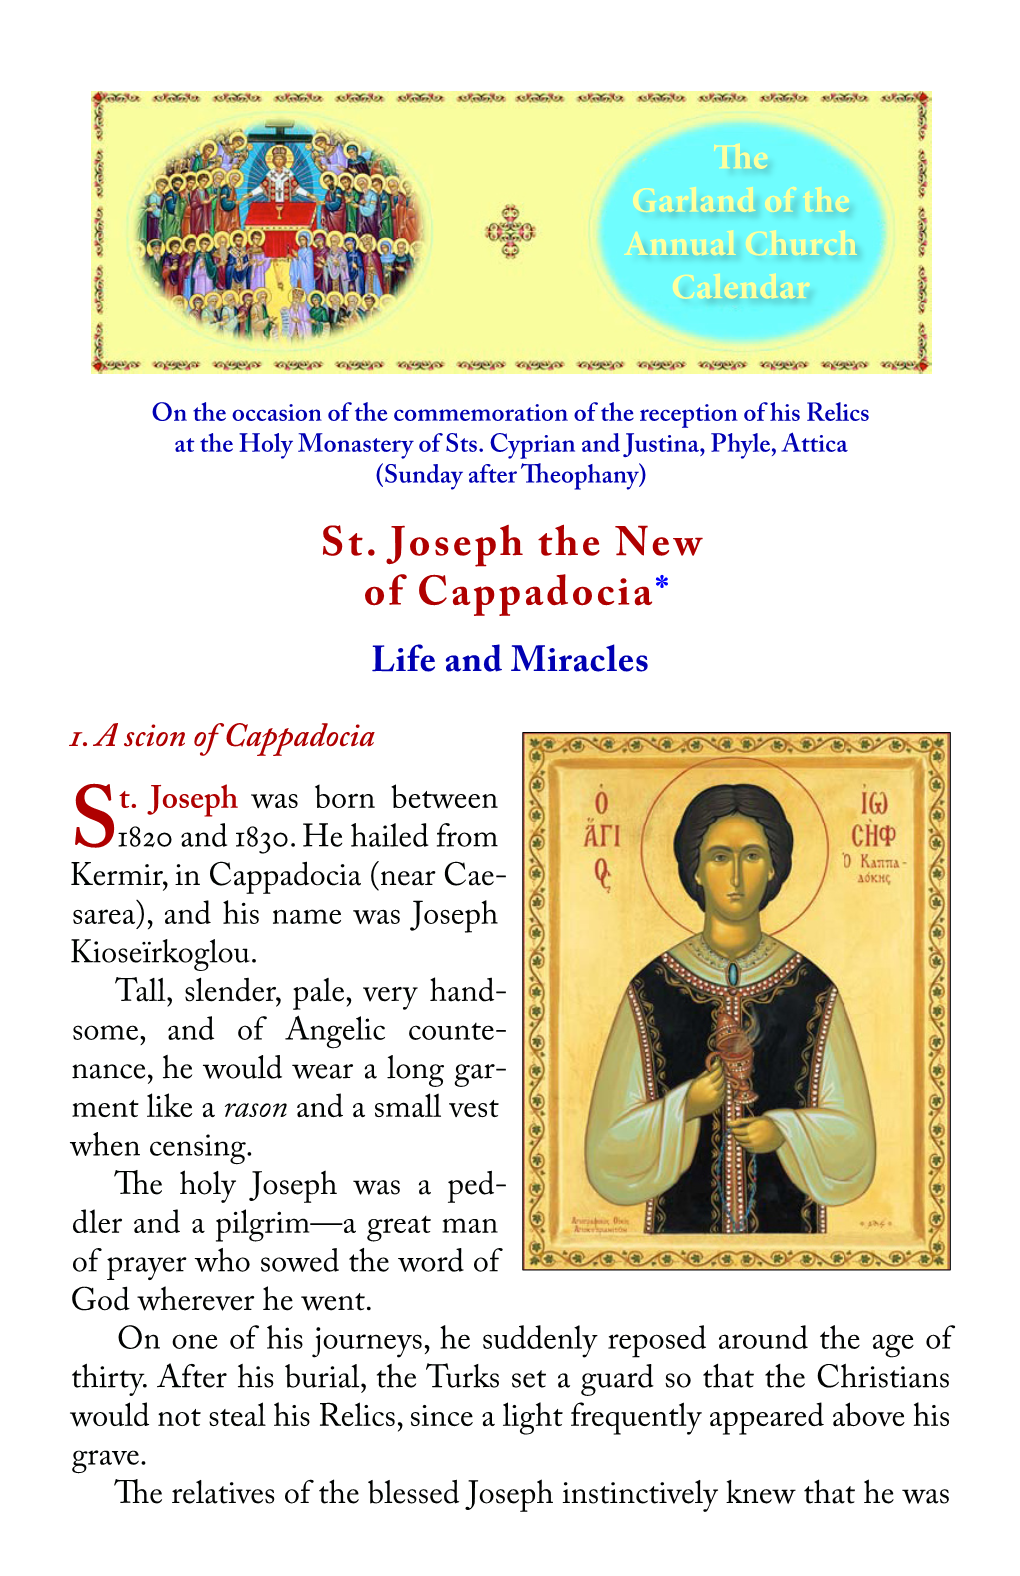 St. Joseph the New of Cappadocia* Life and Miracles